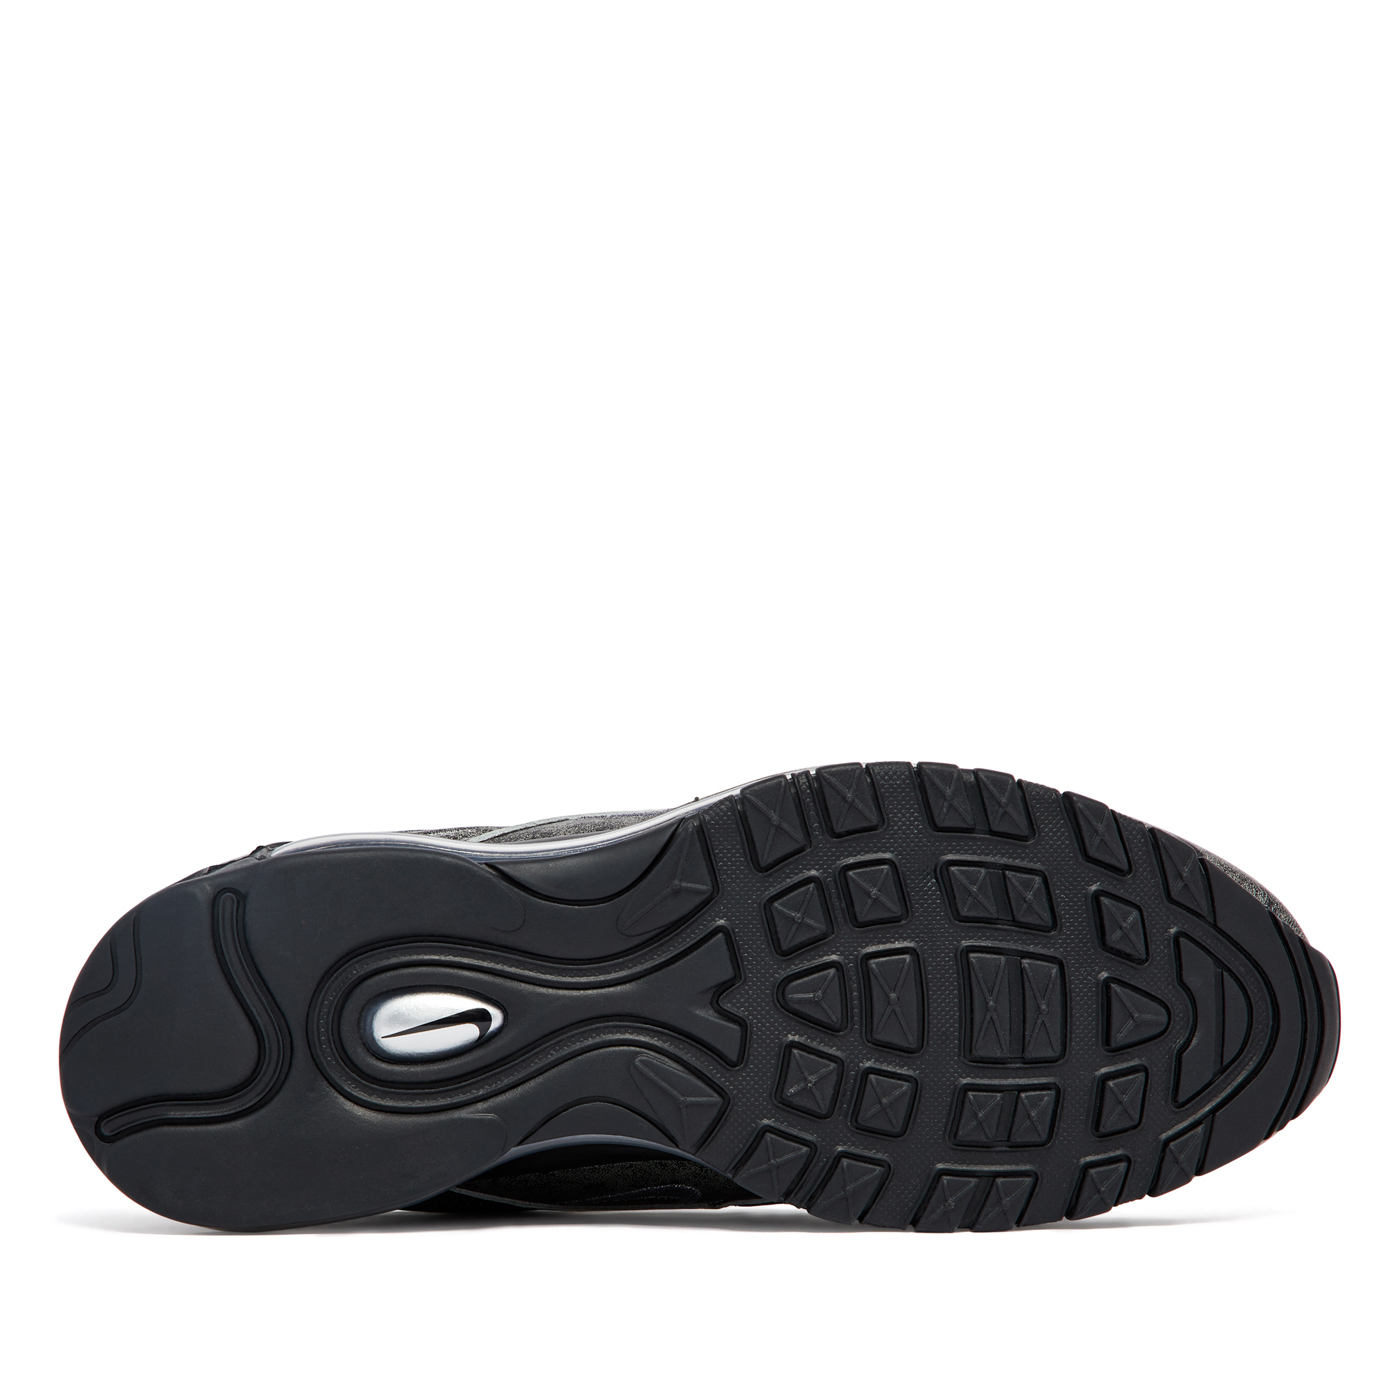 cdg-nike-air-max-97-release-information (11)